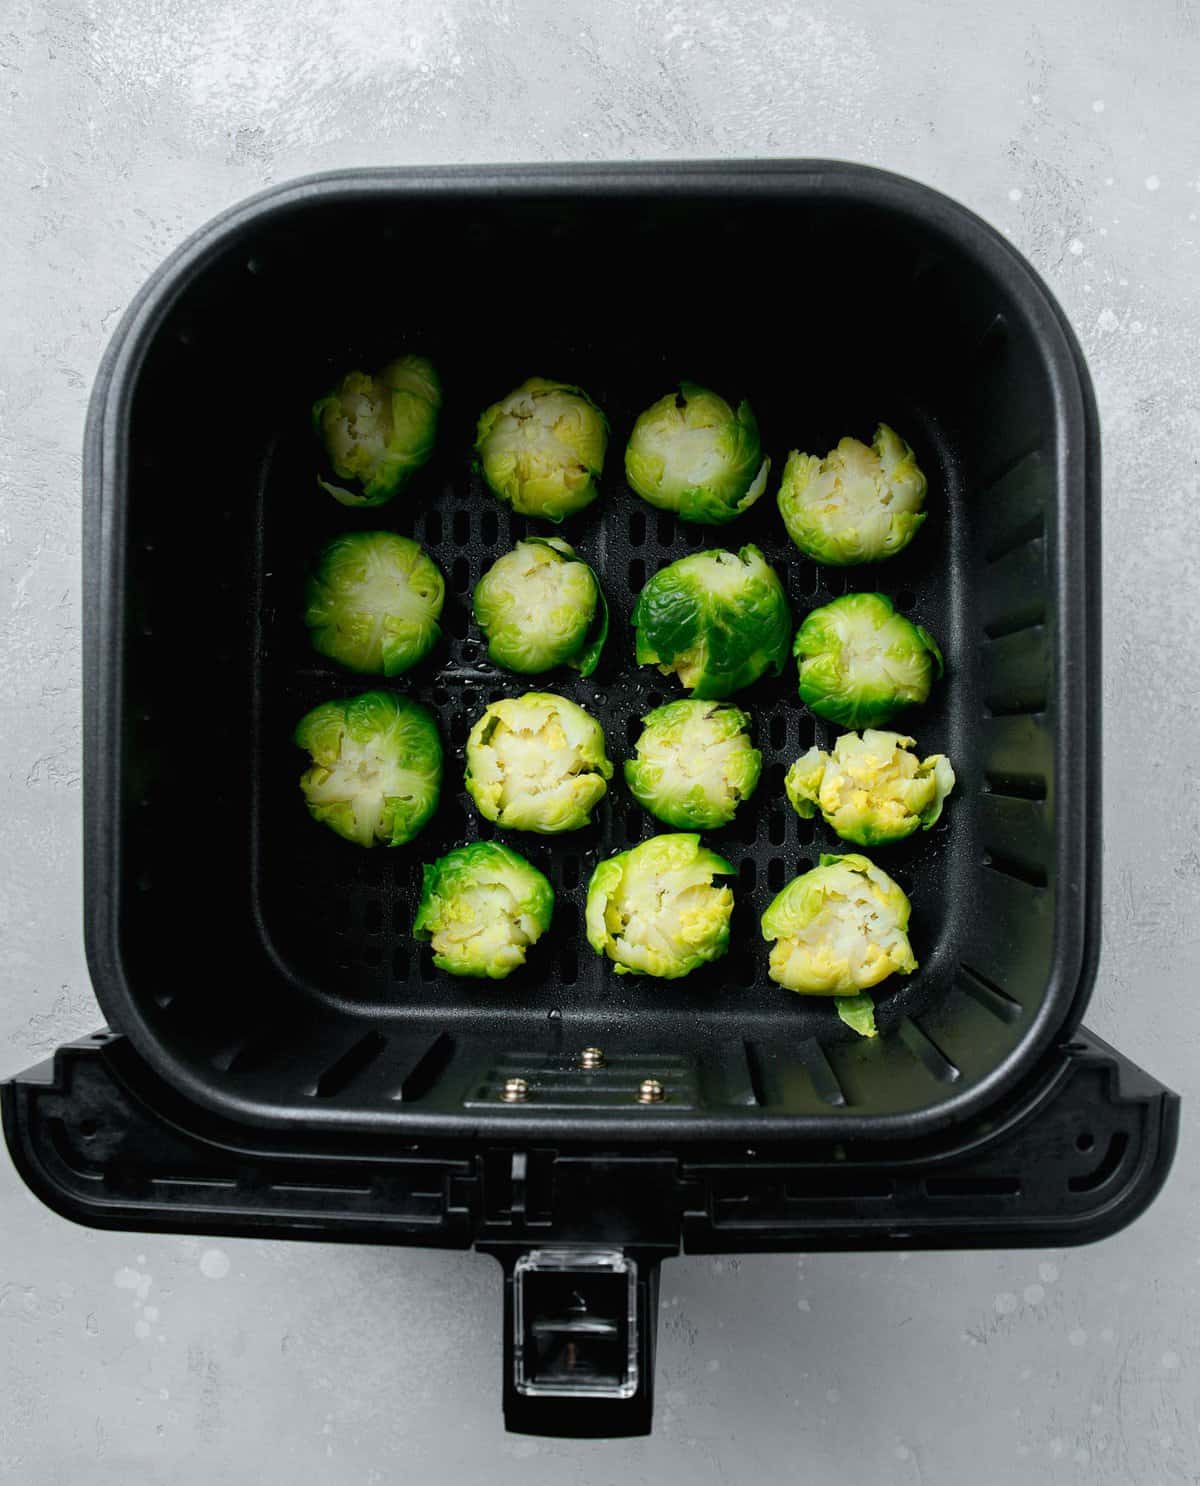 smashed brussels sprouts in basket of an air fryer